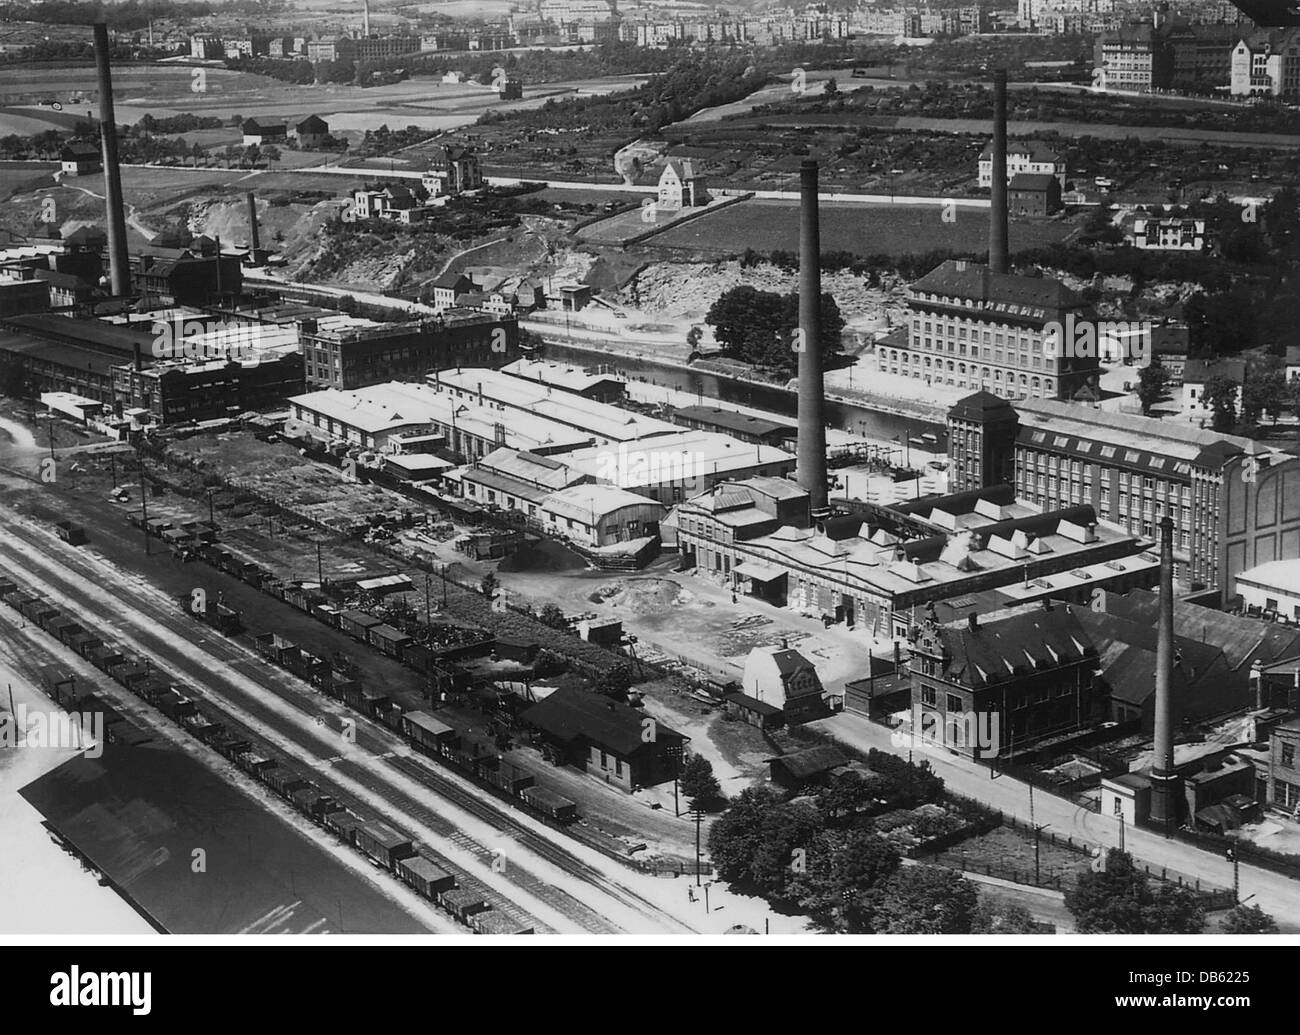 industry, mechanical engineering, factories, Vogtlaendische Maschinenfabrik AG (VOMAG), Plauen, Saxony, exterior view, circa 1939, Additional-Rights-Clearences-Not Available Stock Photo